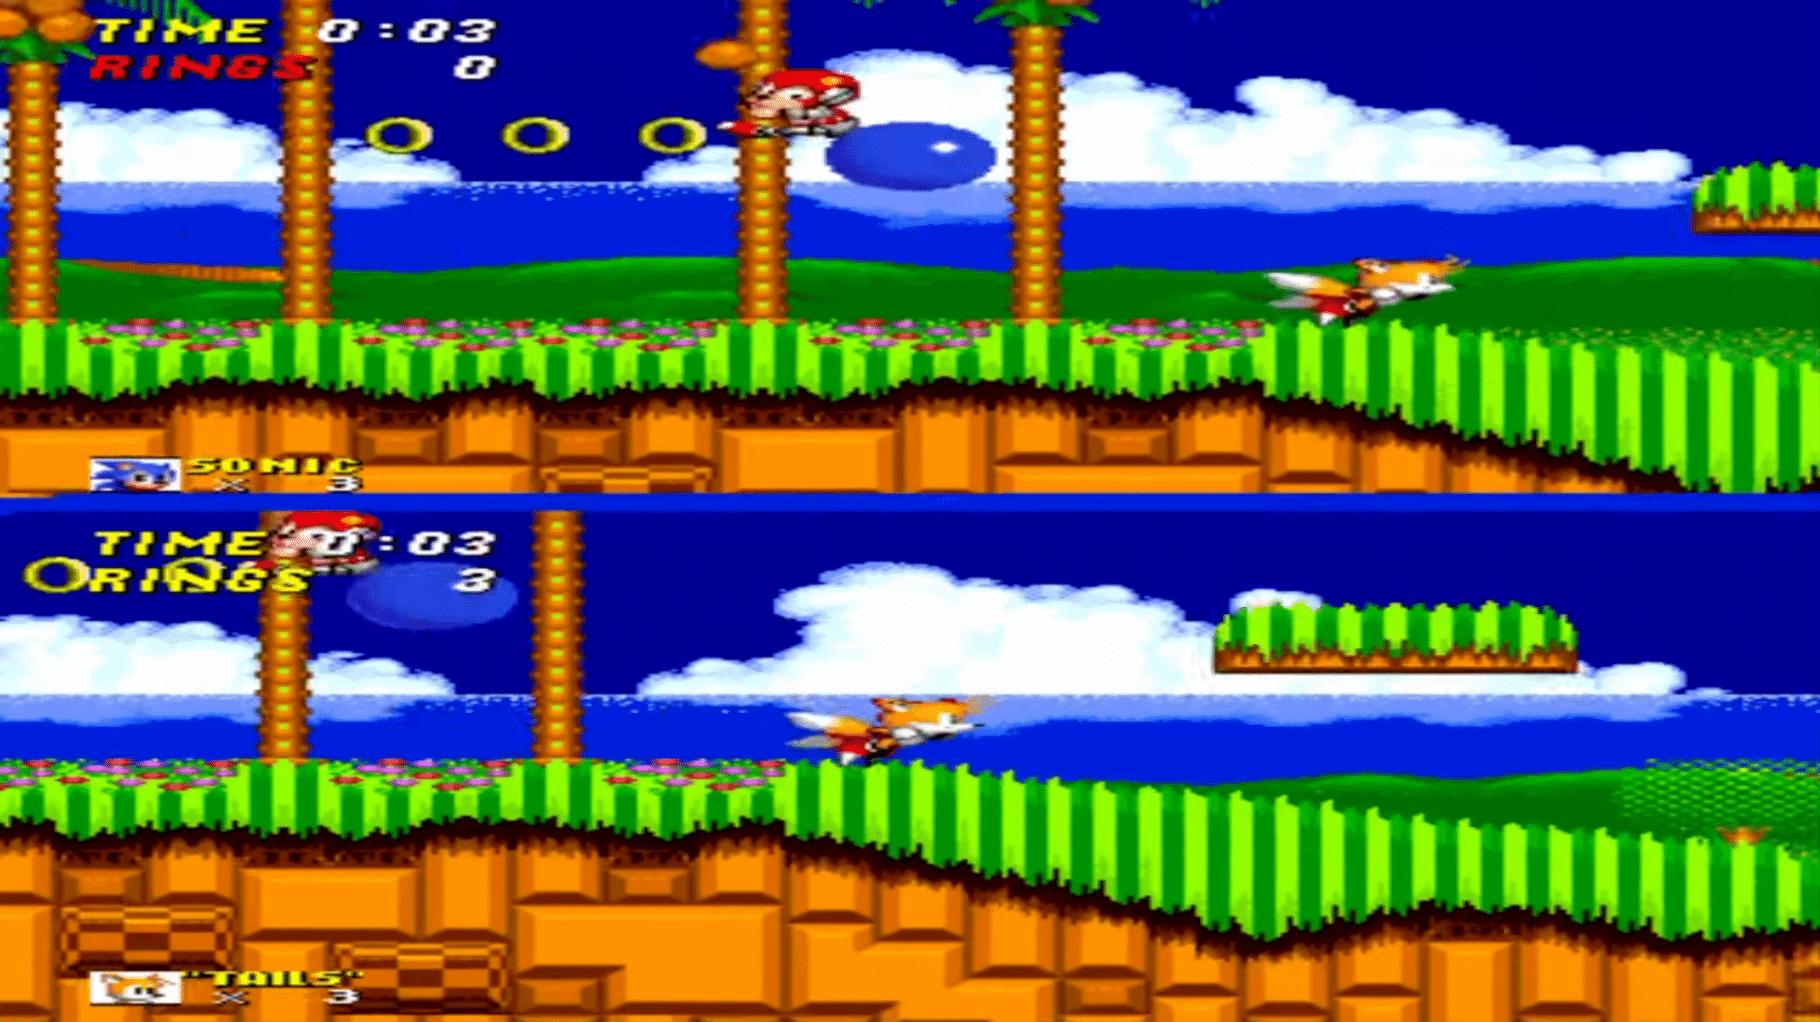  Games - Sonic the Hedgehog 2